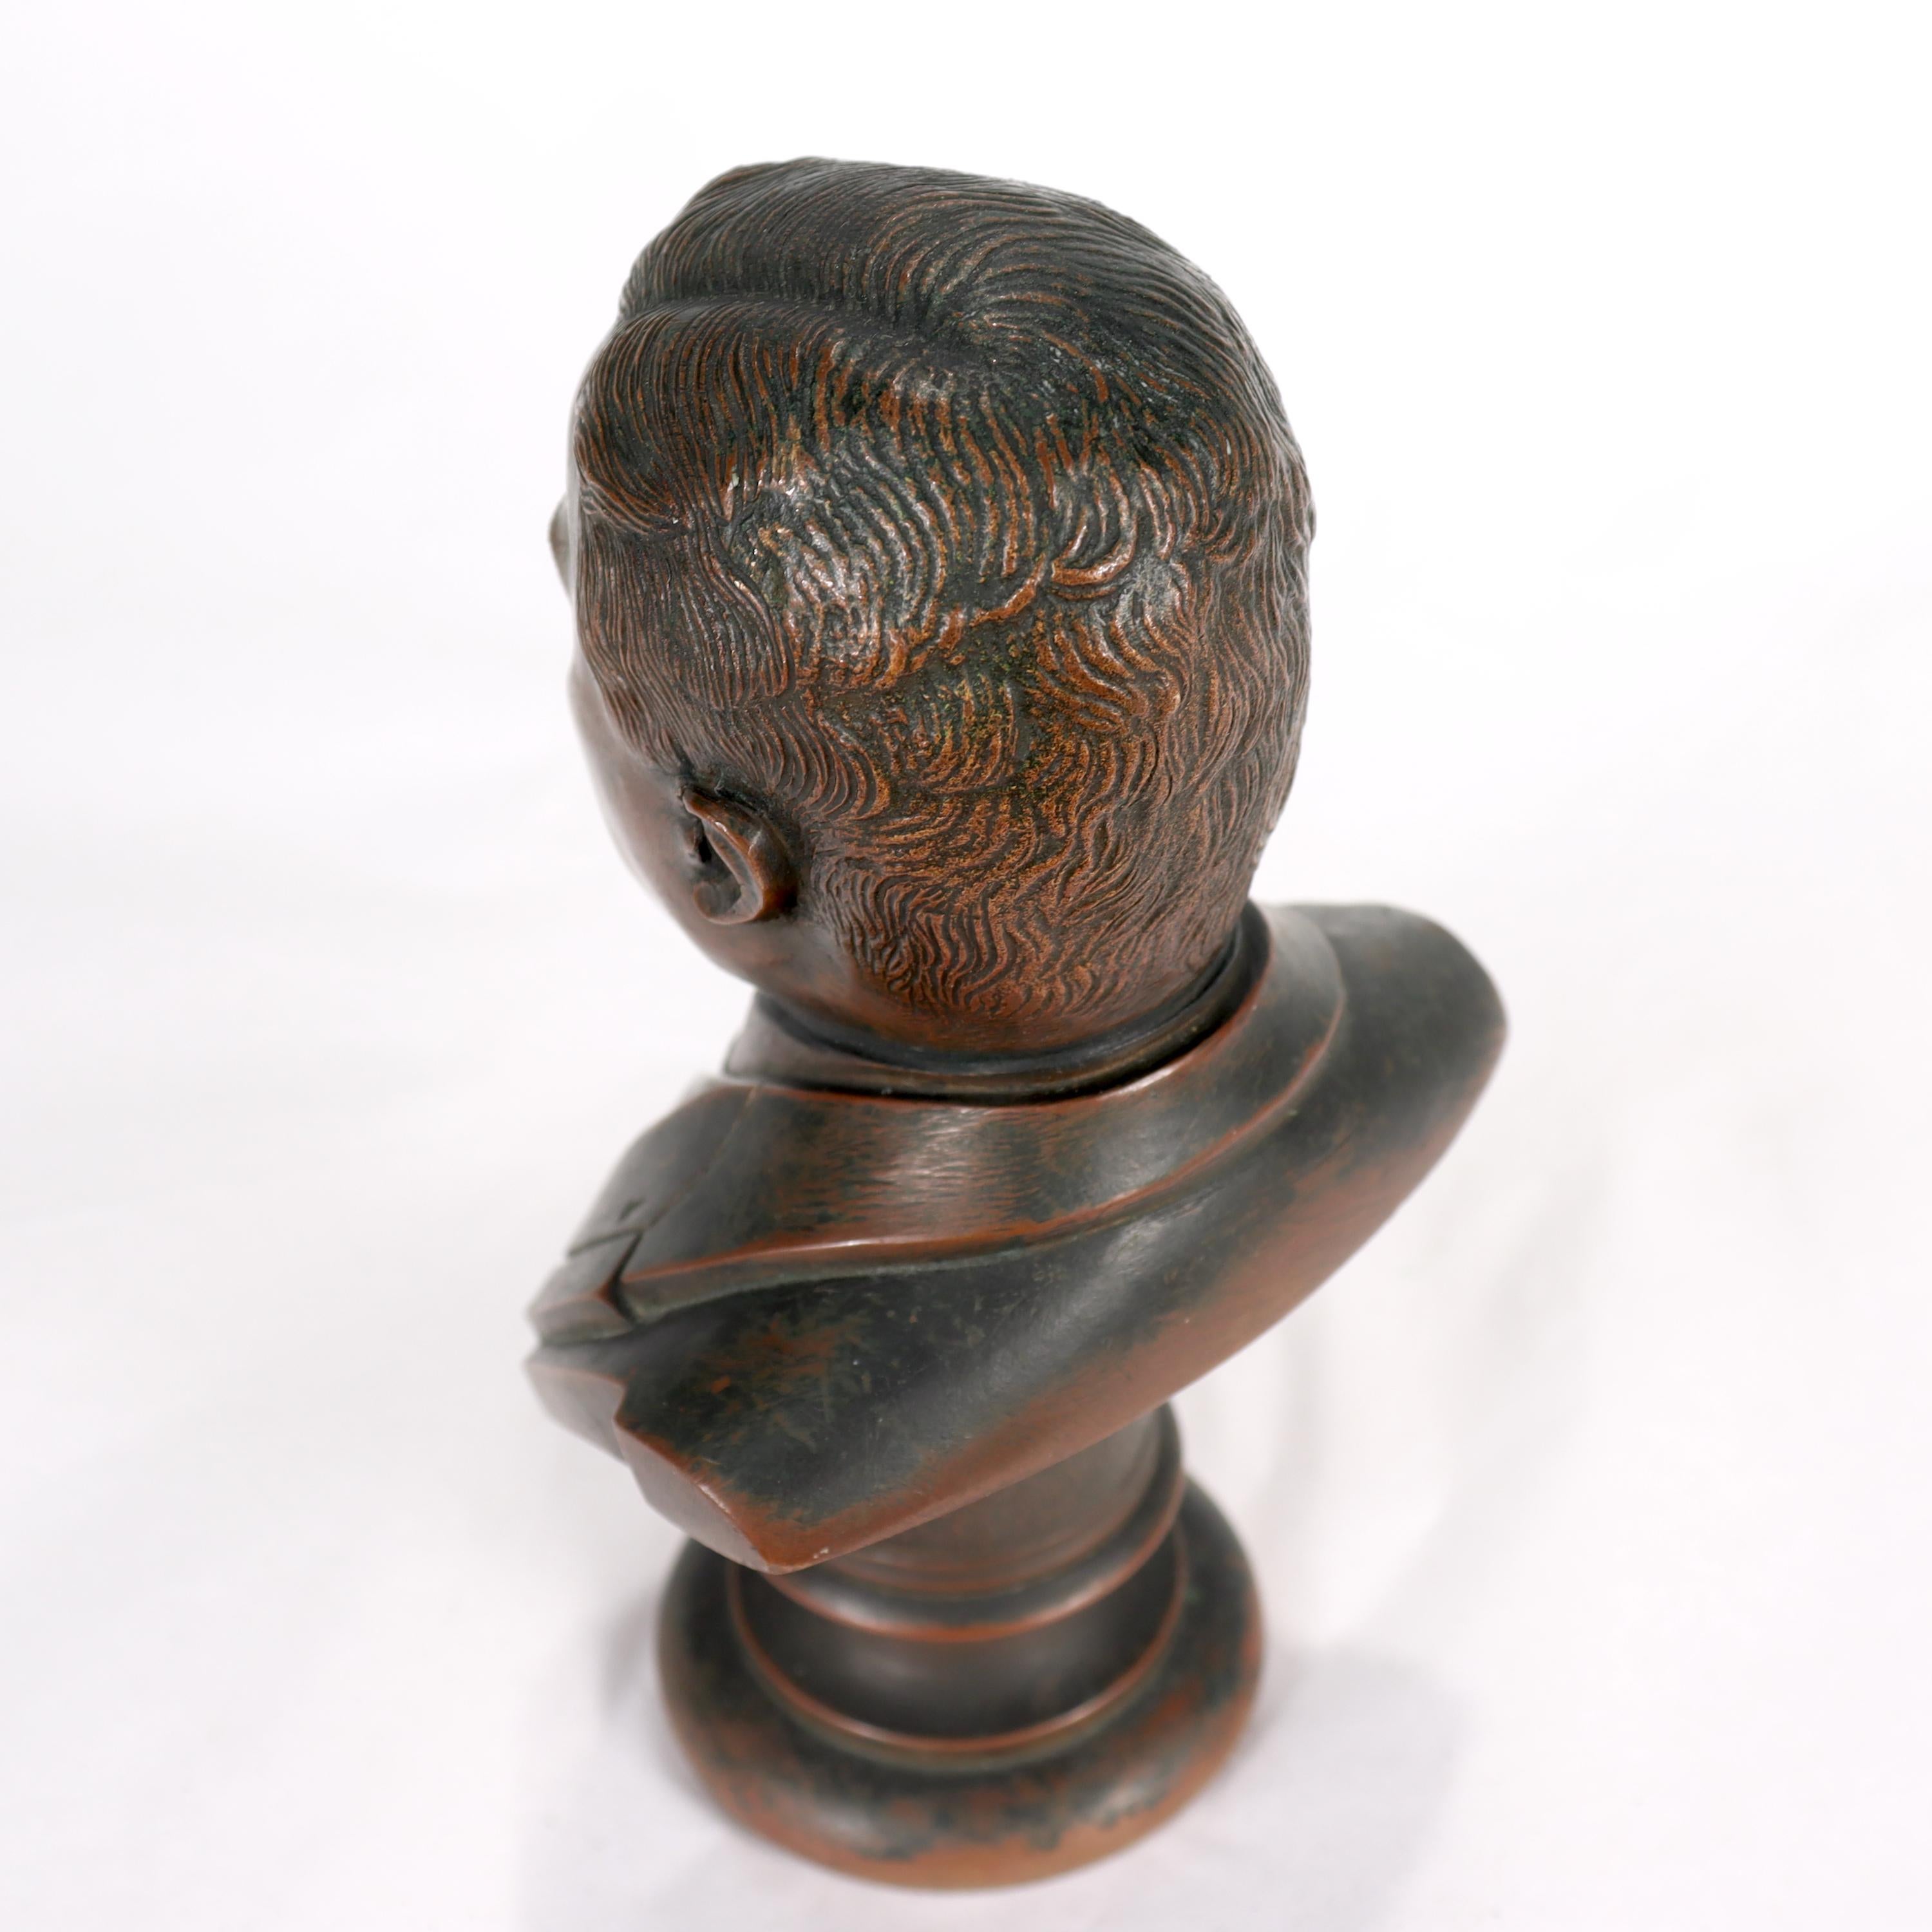 Small Desk or Cabinet Sized Bronze Bust of President Theodore 'Teddy' Roosevelt 5